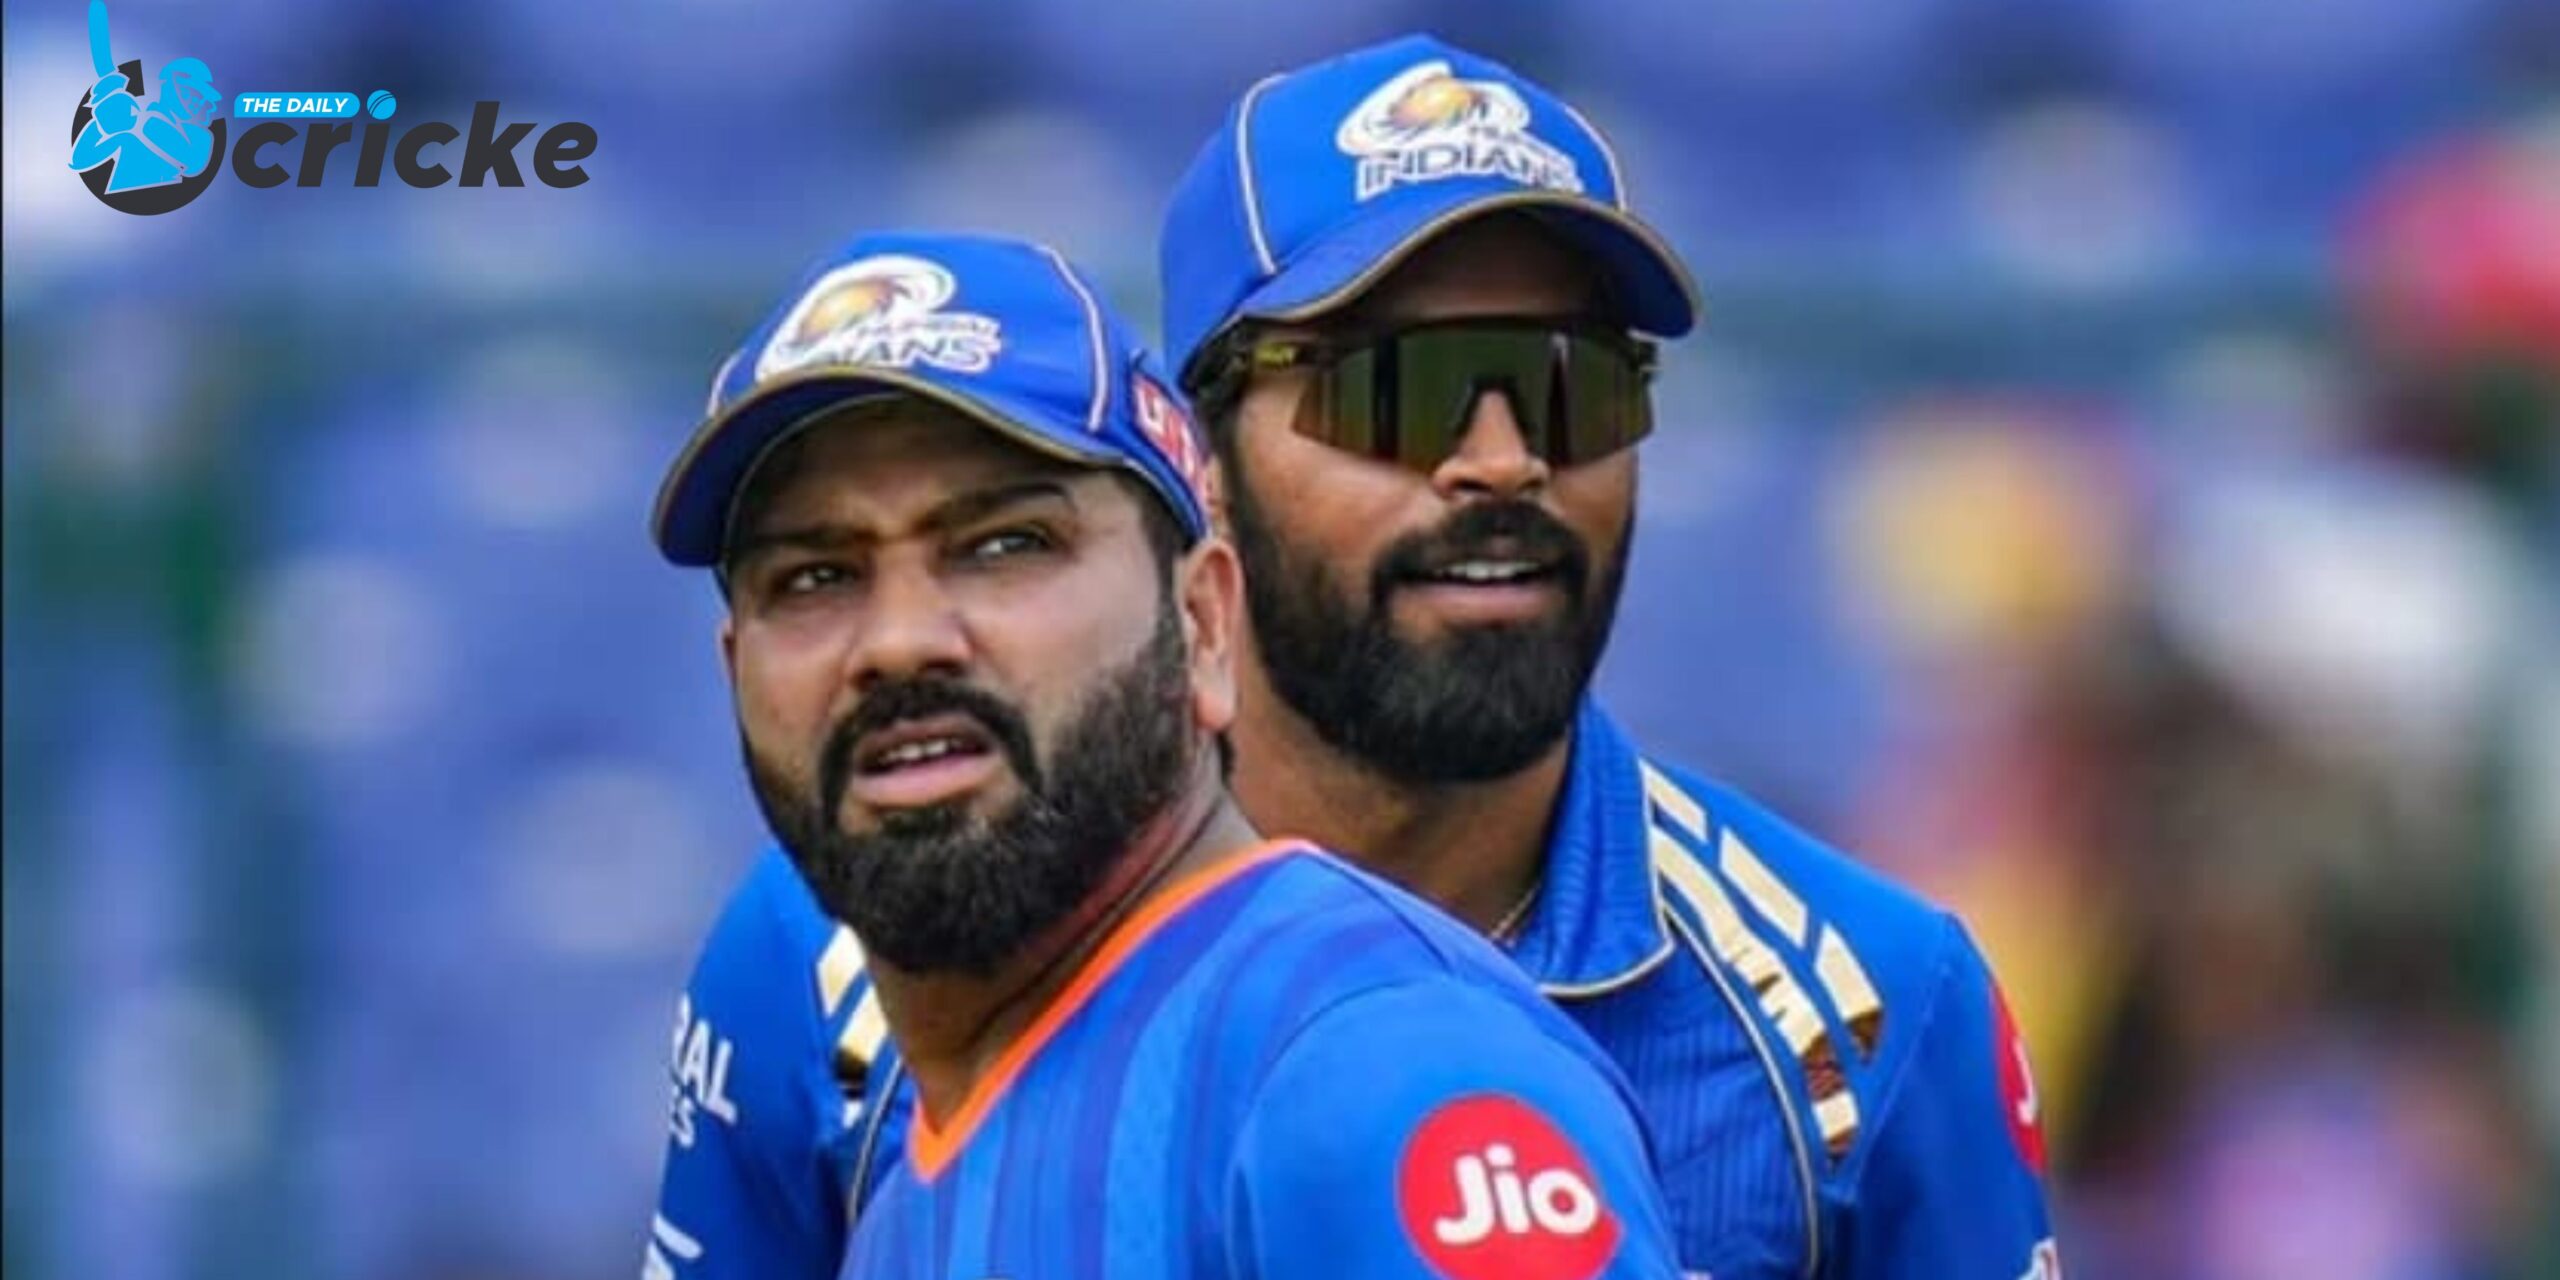 After breaking the IPL code of conduct, Rohit Sharma and other MI players were also disciplined, while Hardik Pandya received a fine of INR 24 lakh.